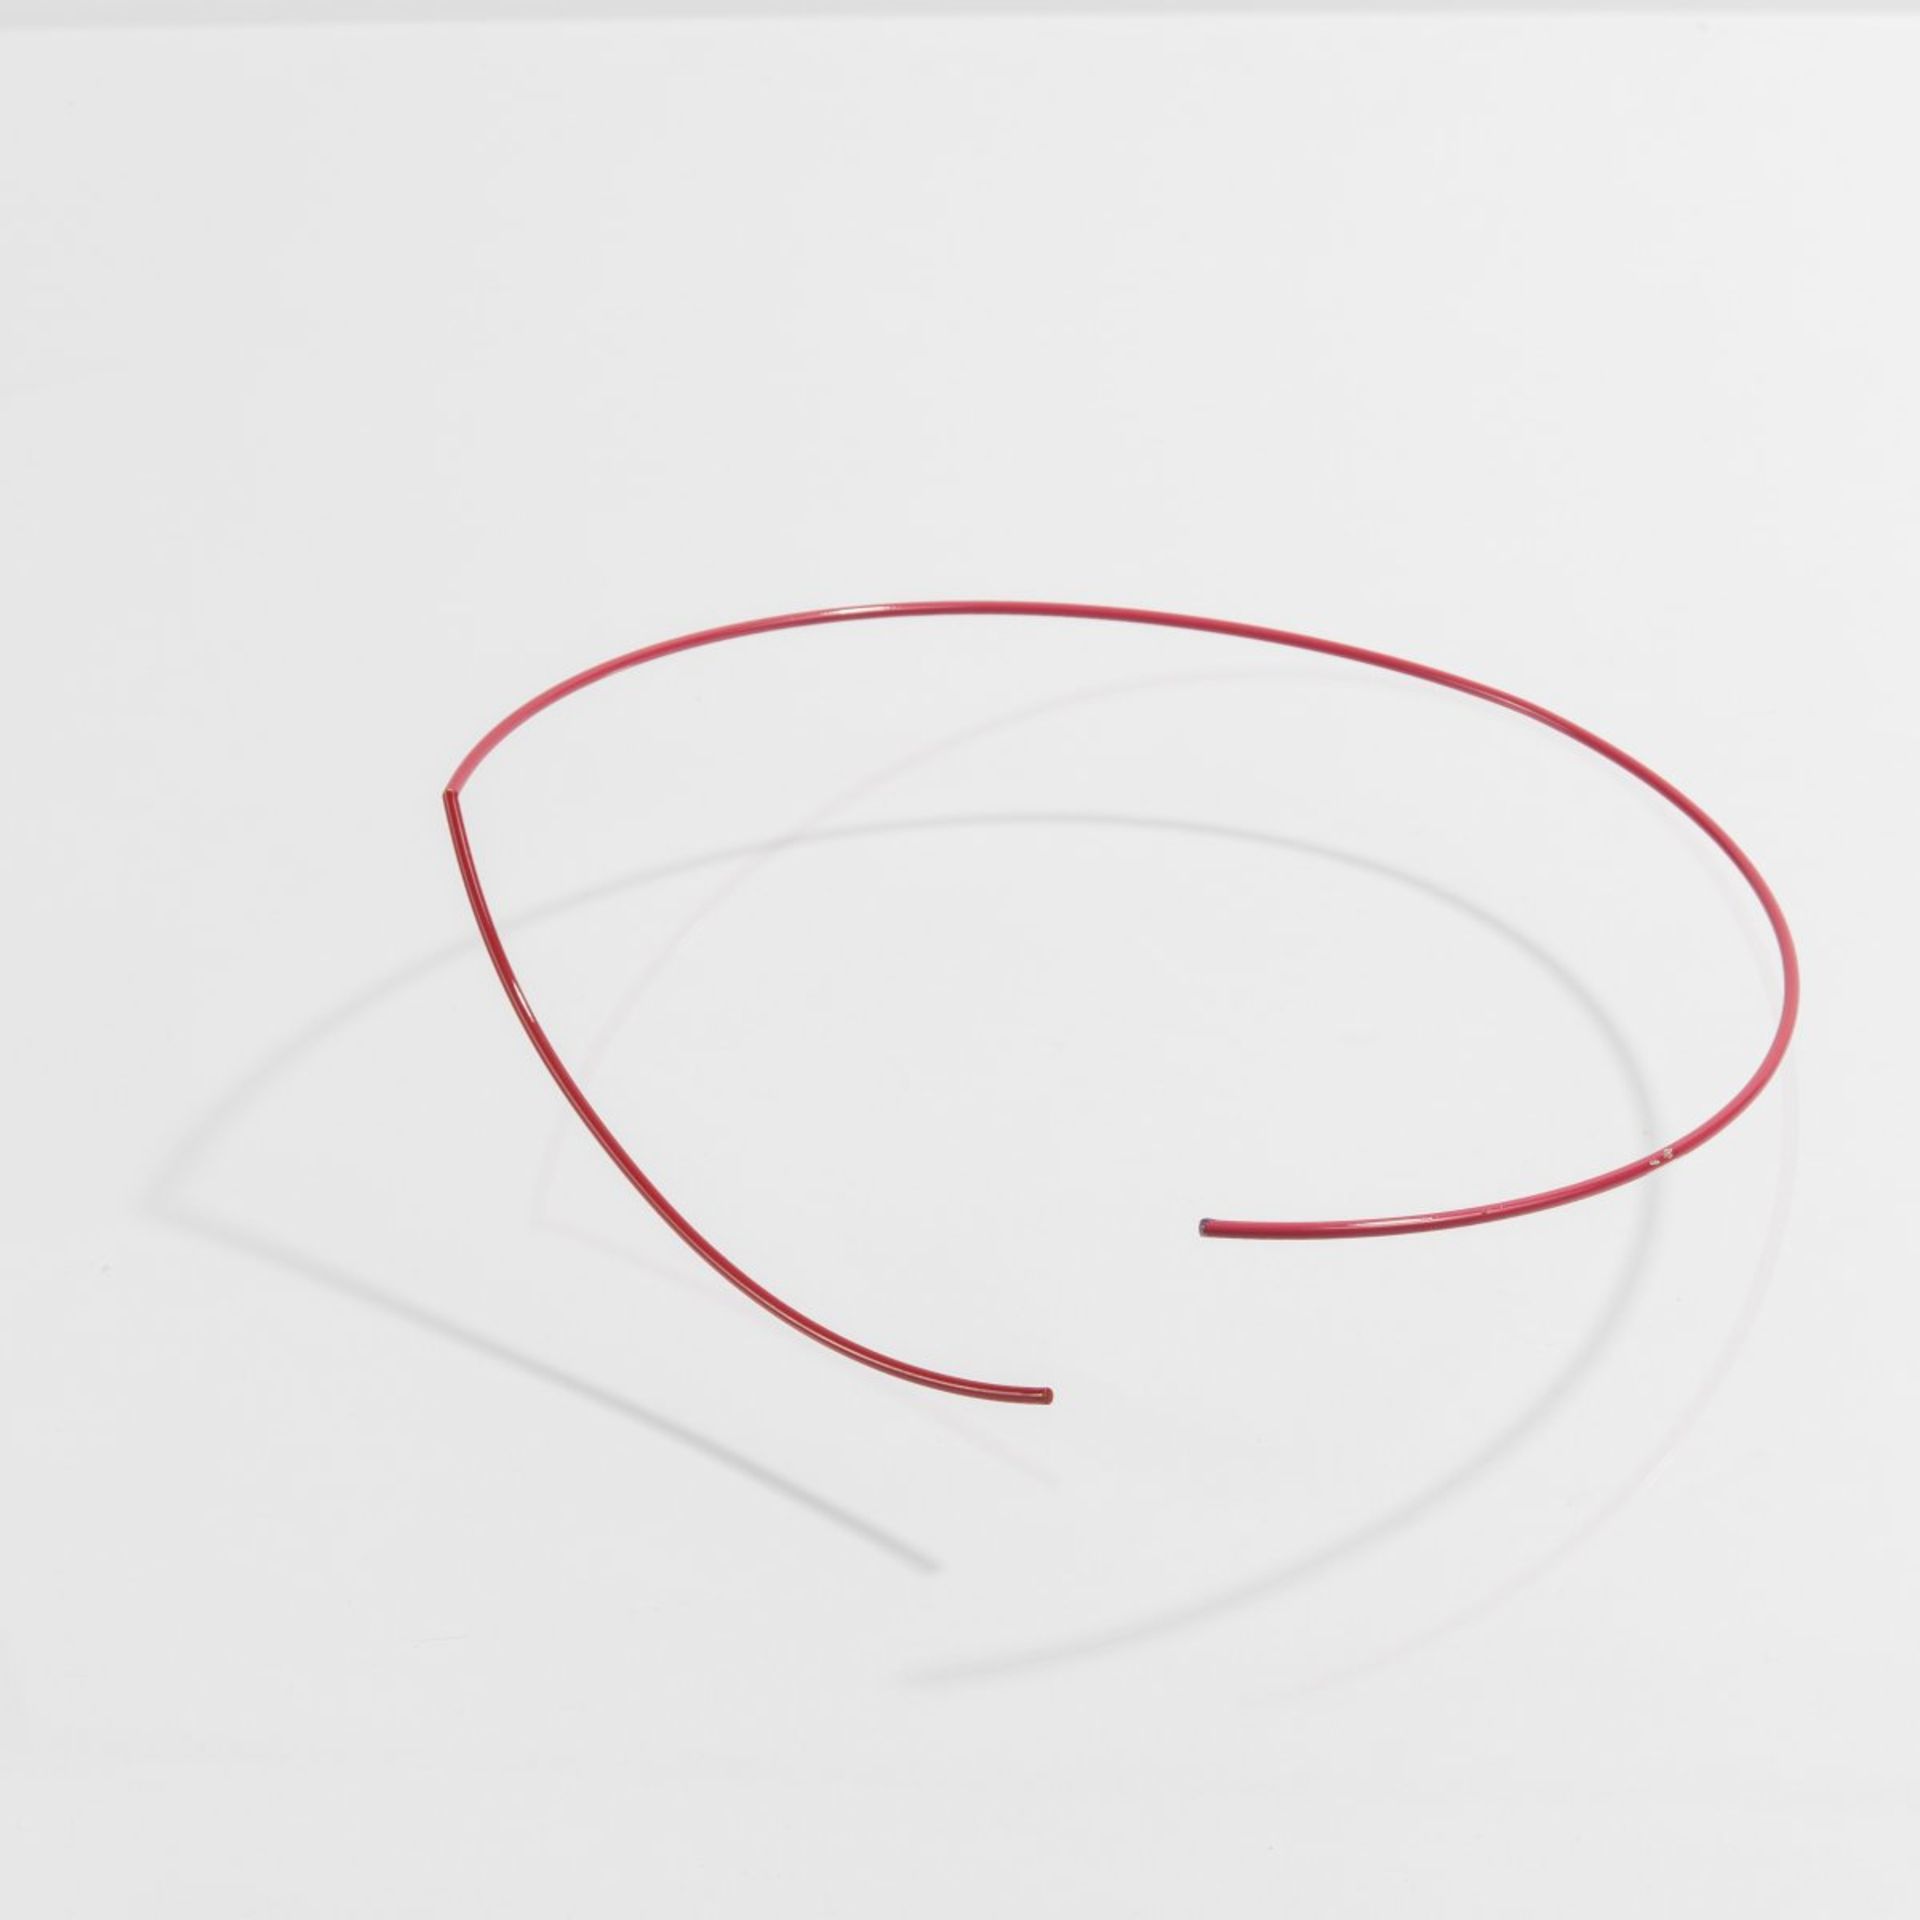 Herman Hermsen, Necklace, 1982Necklace, 1982Wire, painted red. 44 grams. Ø 26 cm. Unsigned.From - Bild 2 aus 2